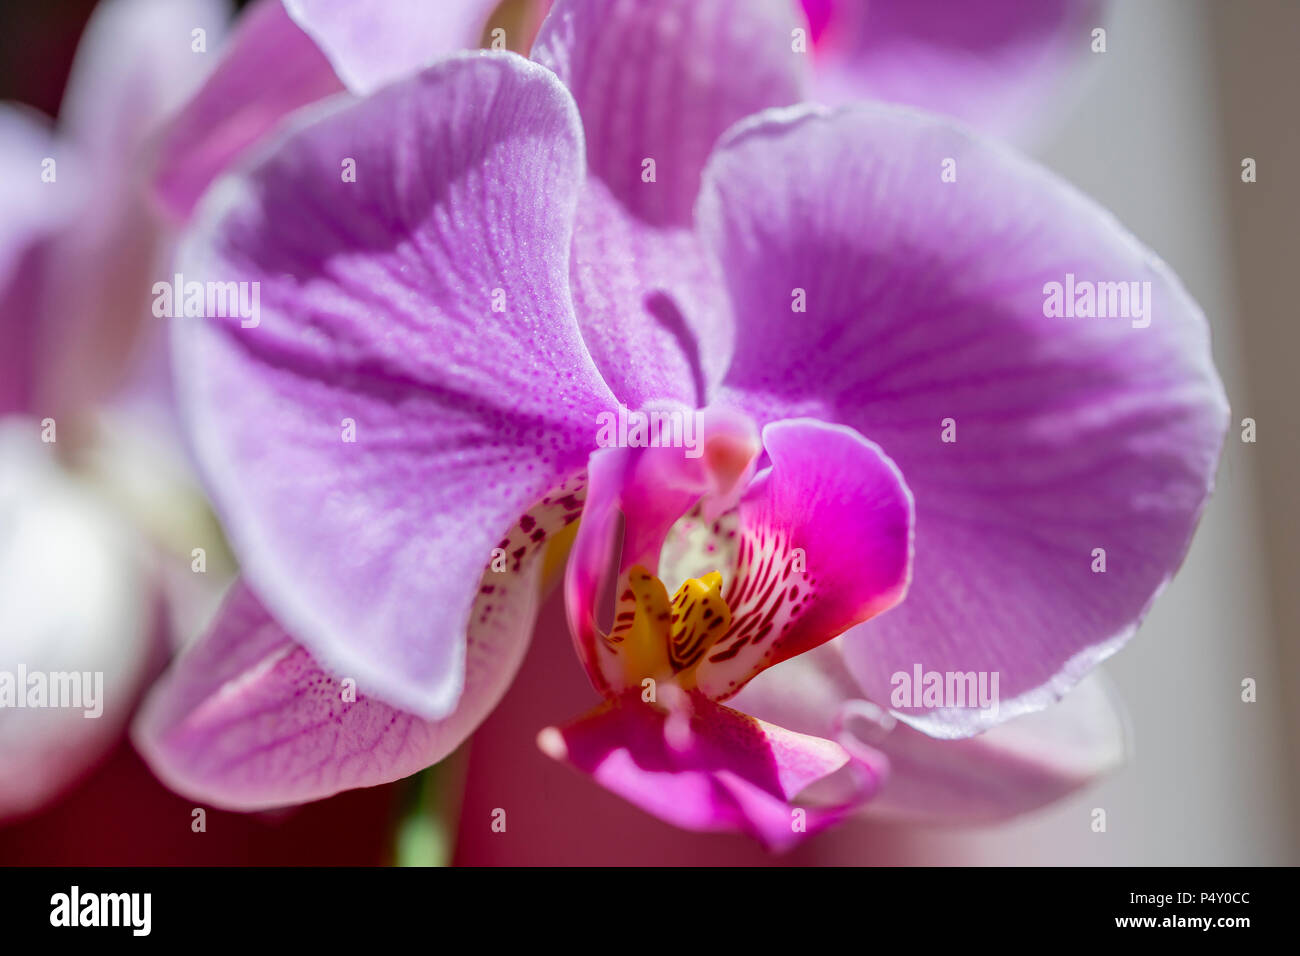 Closeup of a pink/ magenta Phalaenopsis orchid flowering plant flower Stock Photo